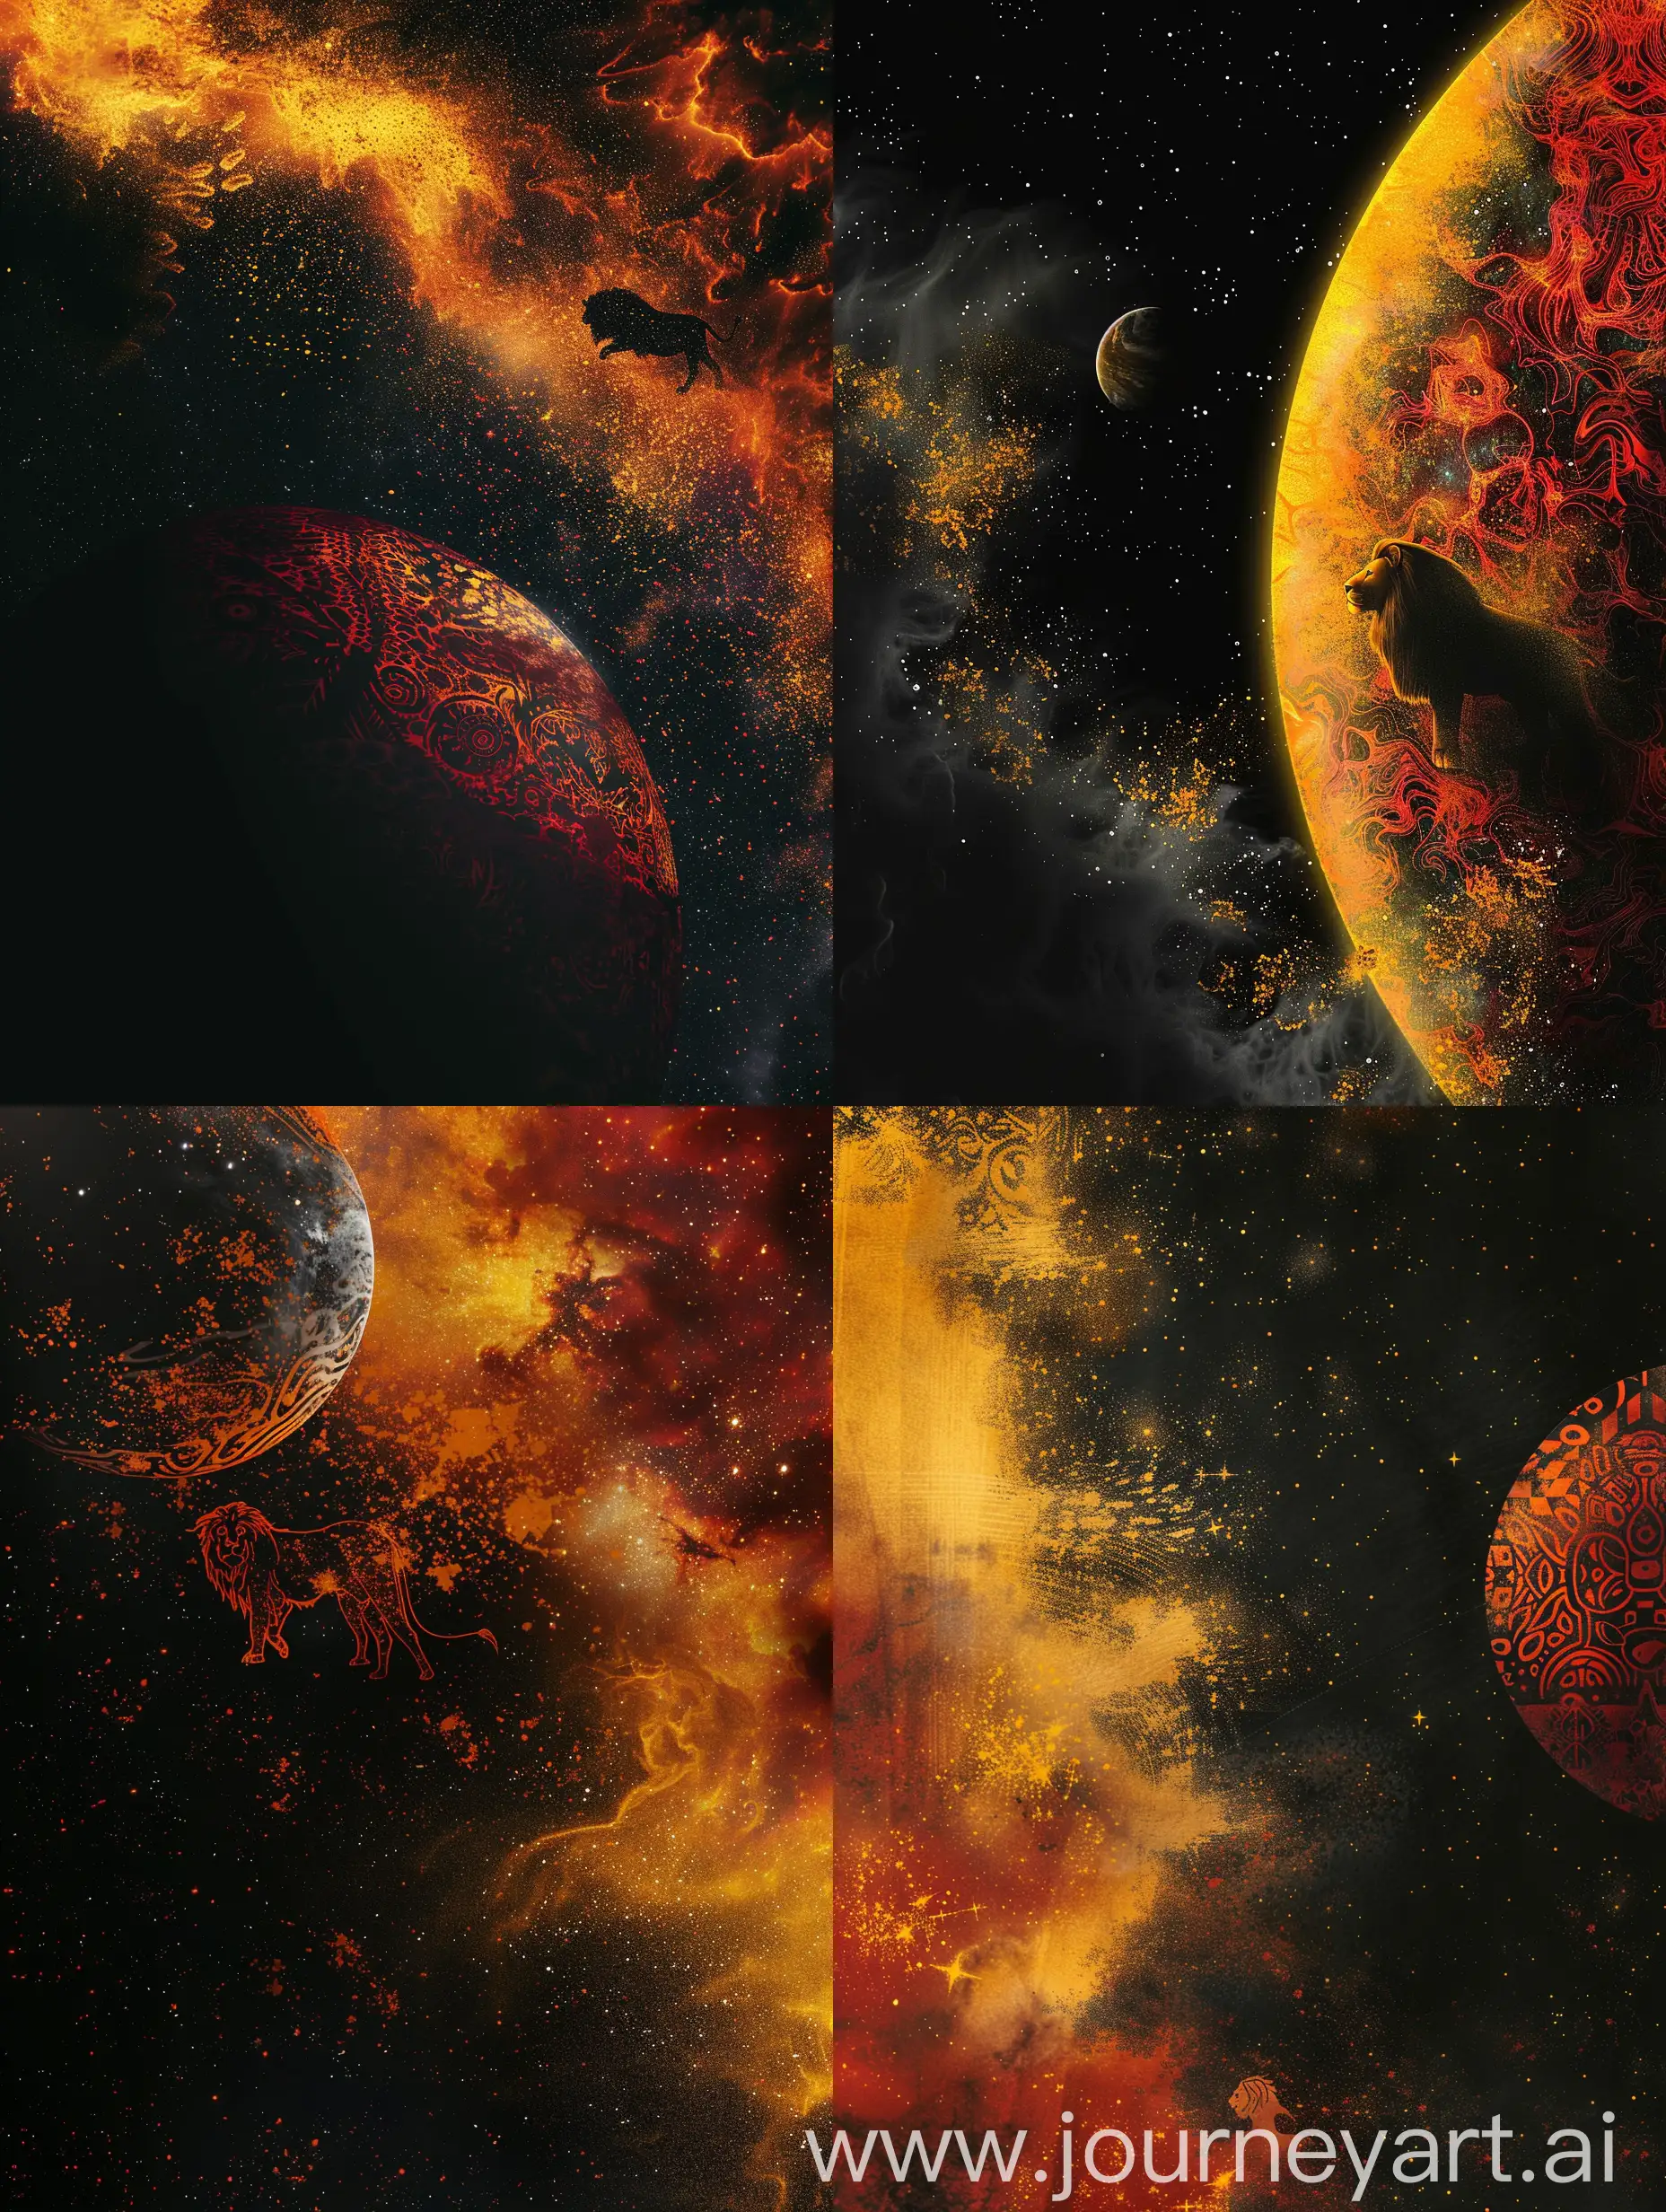 Yellow Red space image, one side yellow and one side red, space dust clouds and stars, realistic Nasa space photo, Lion silhouette in the distance, lion silhouette view from space dust Yellow Red Orange Burgundy colors, black space background  A planet is visible in the background, it has orange and red patterns